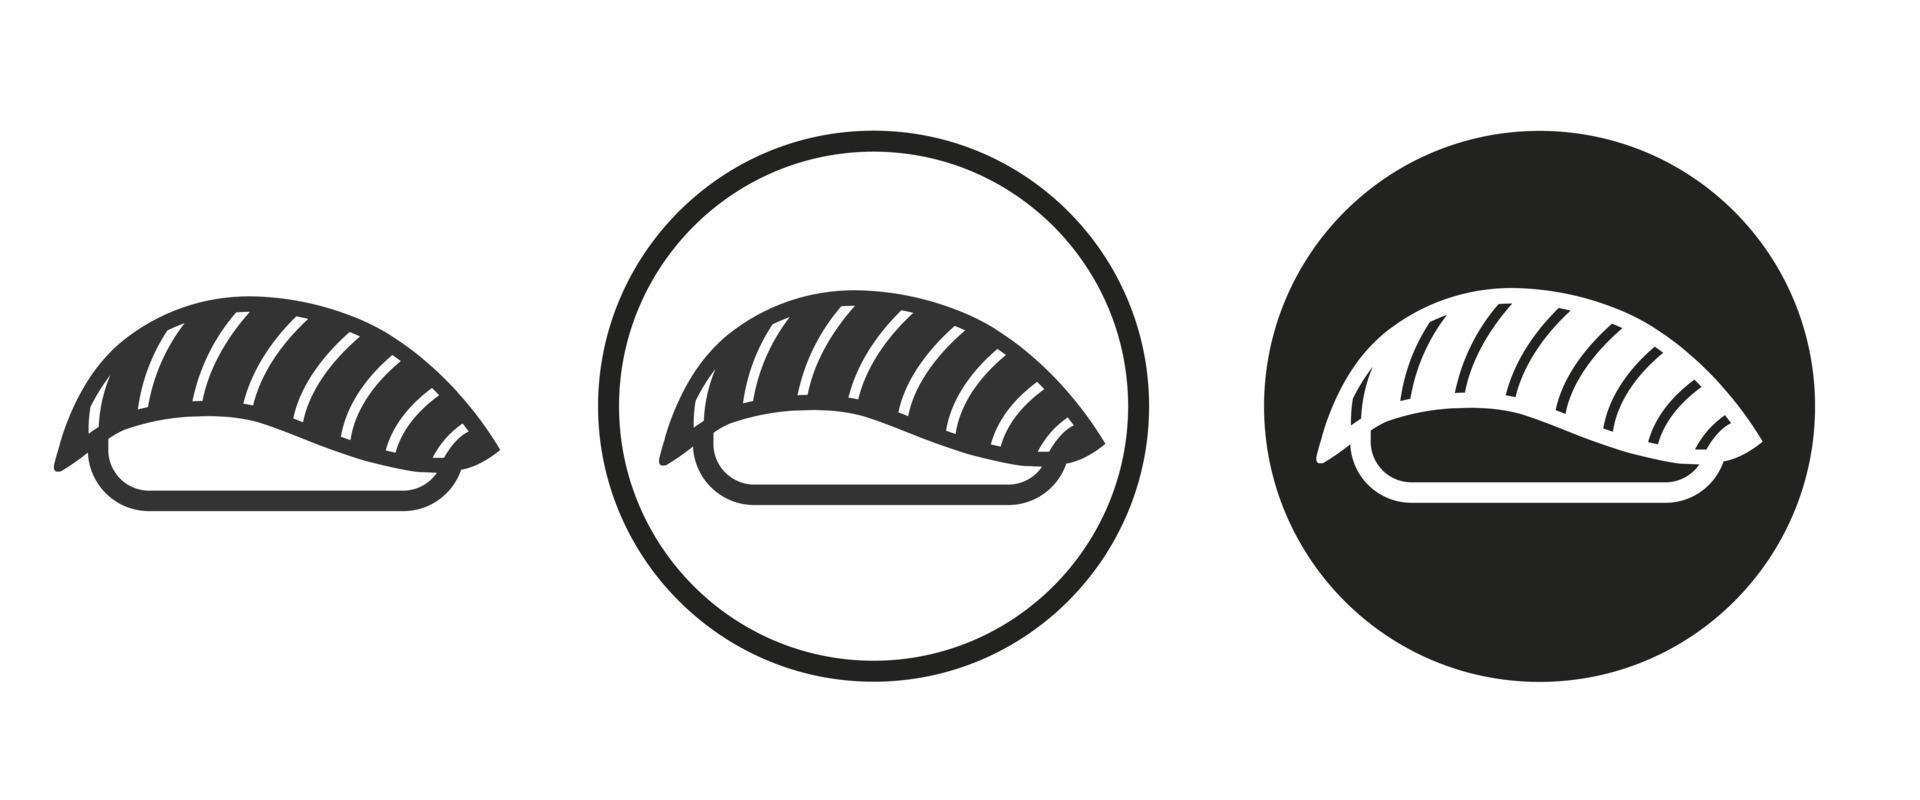 Sushi icon . web icon set . icons collection. Simple vector illustration.